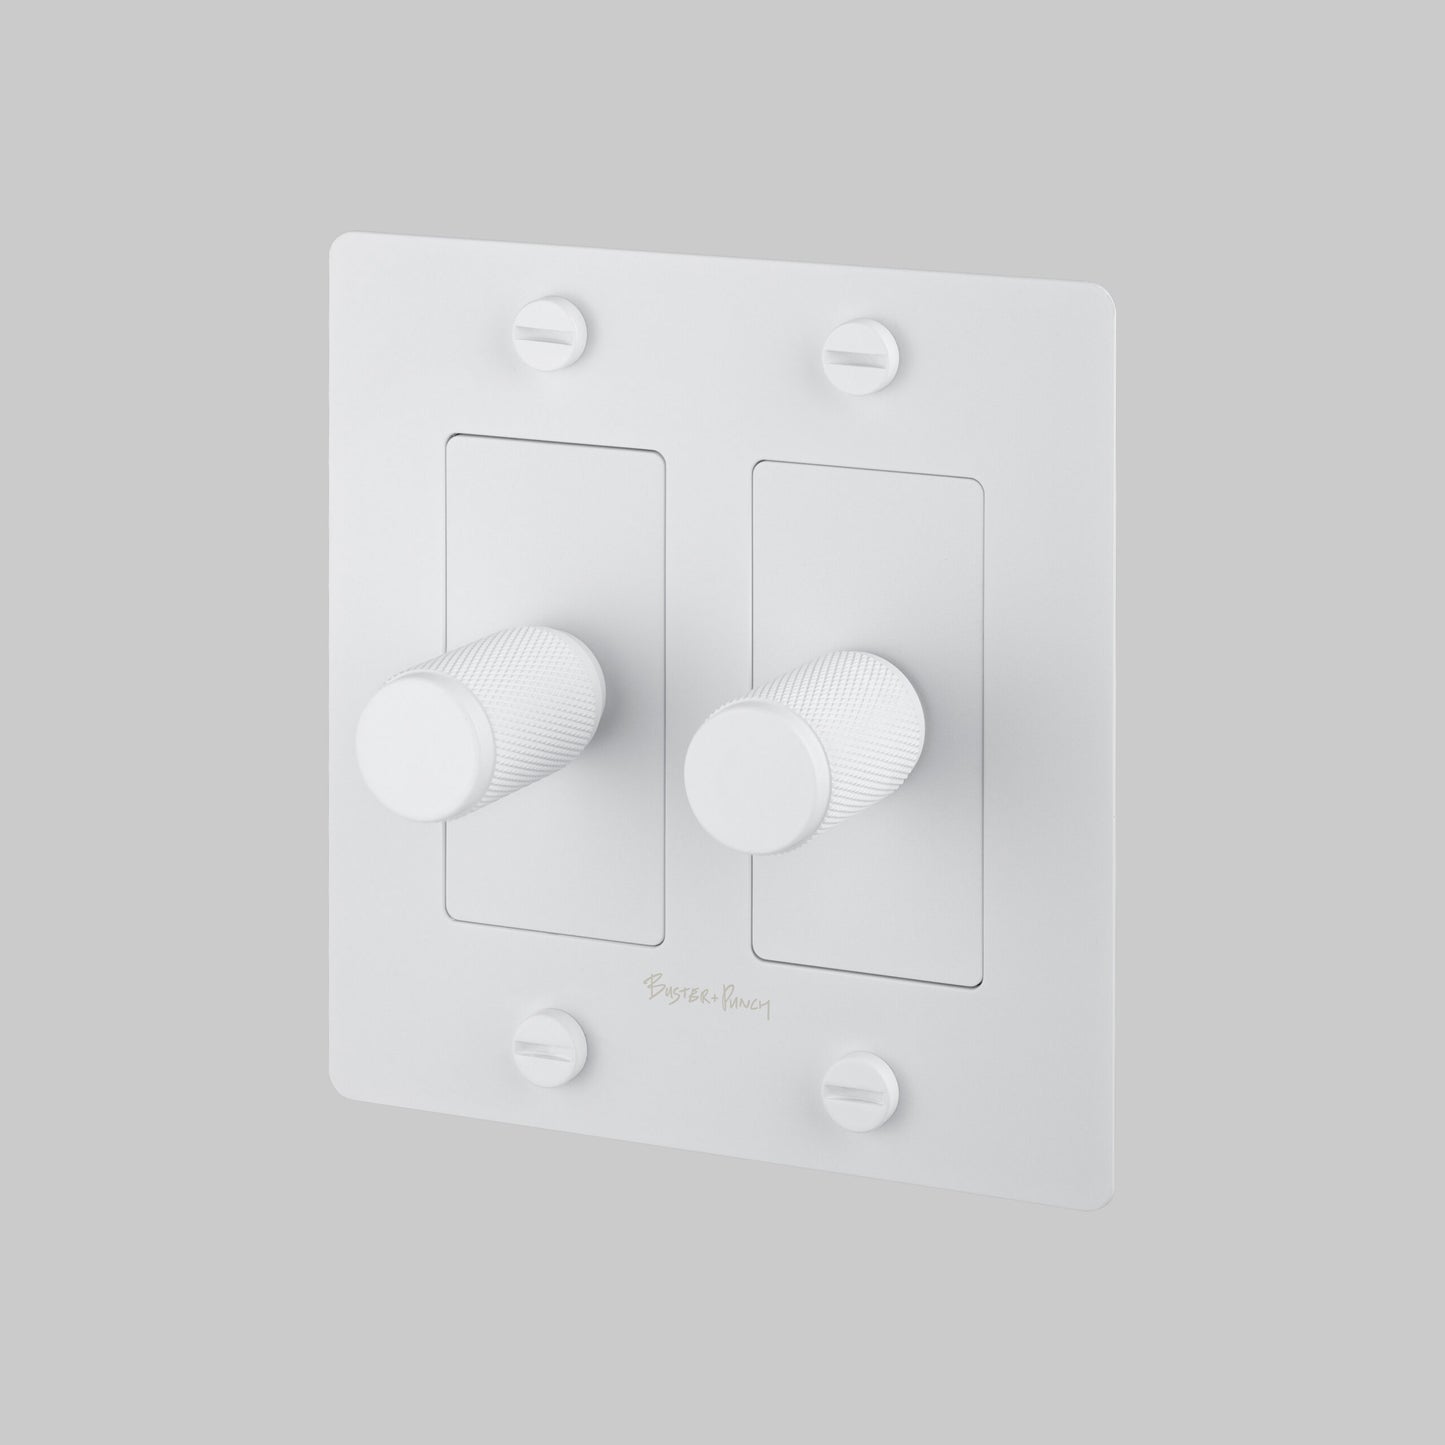 BUSTER AND PUNCH | 2G DIMMERS $265.00 - $270.00